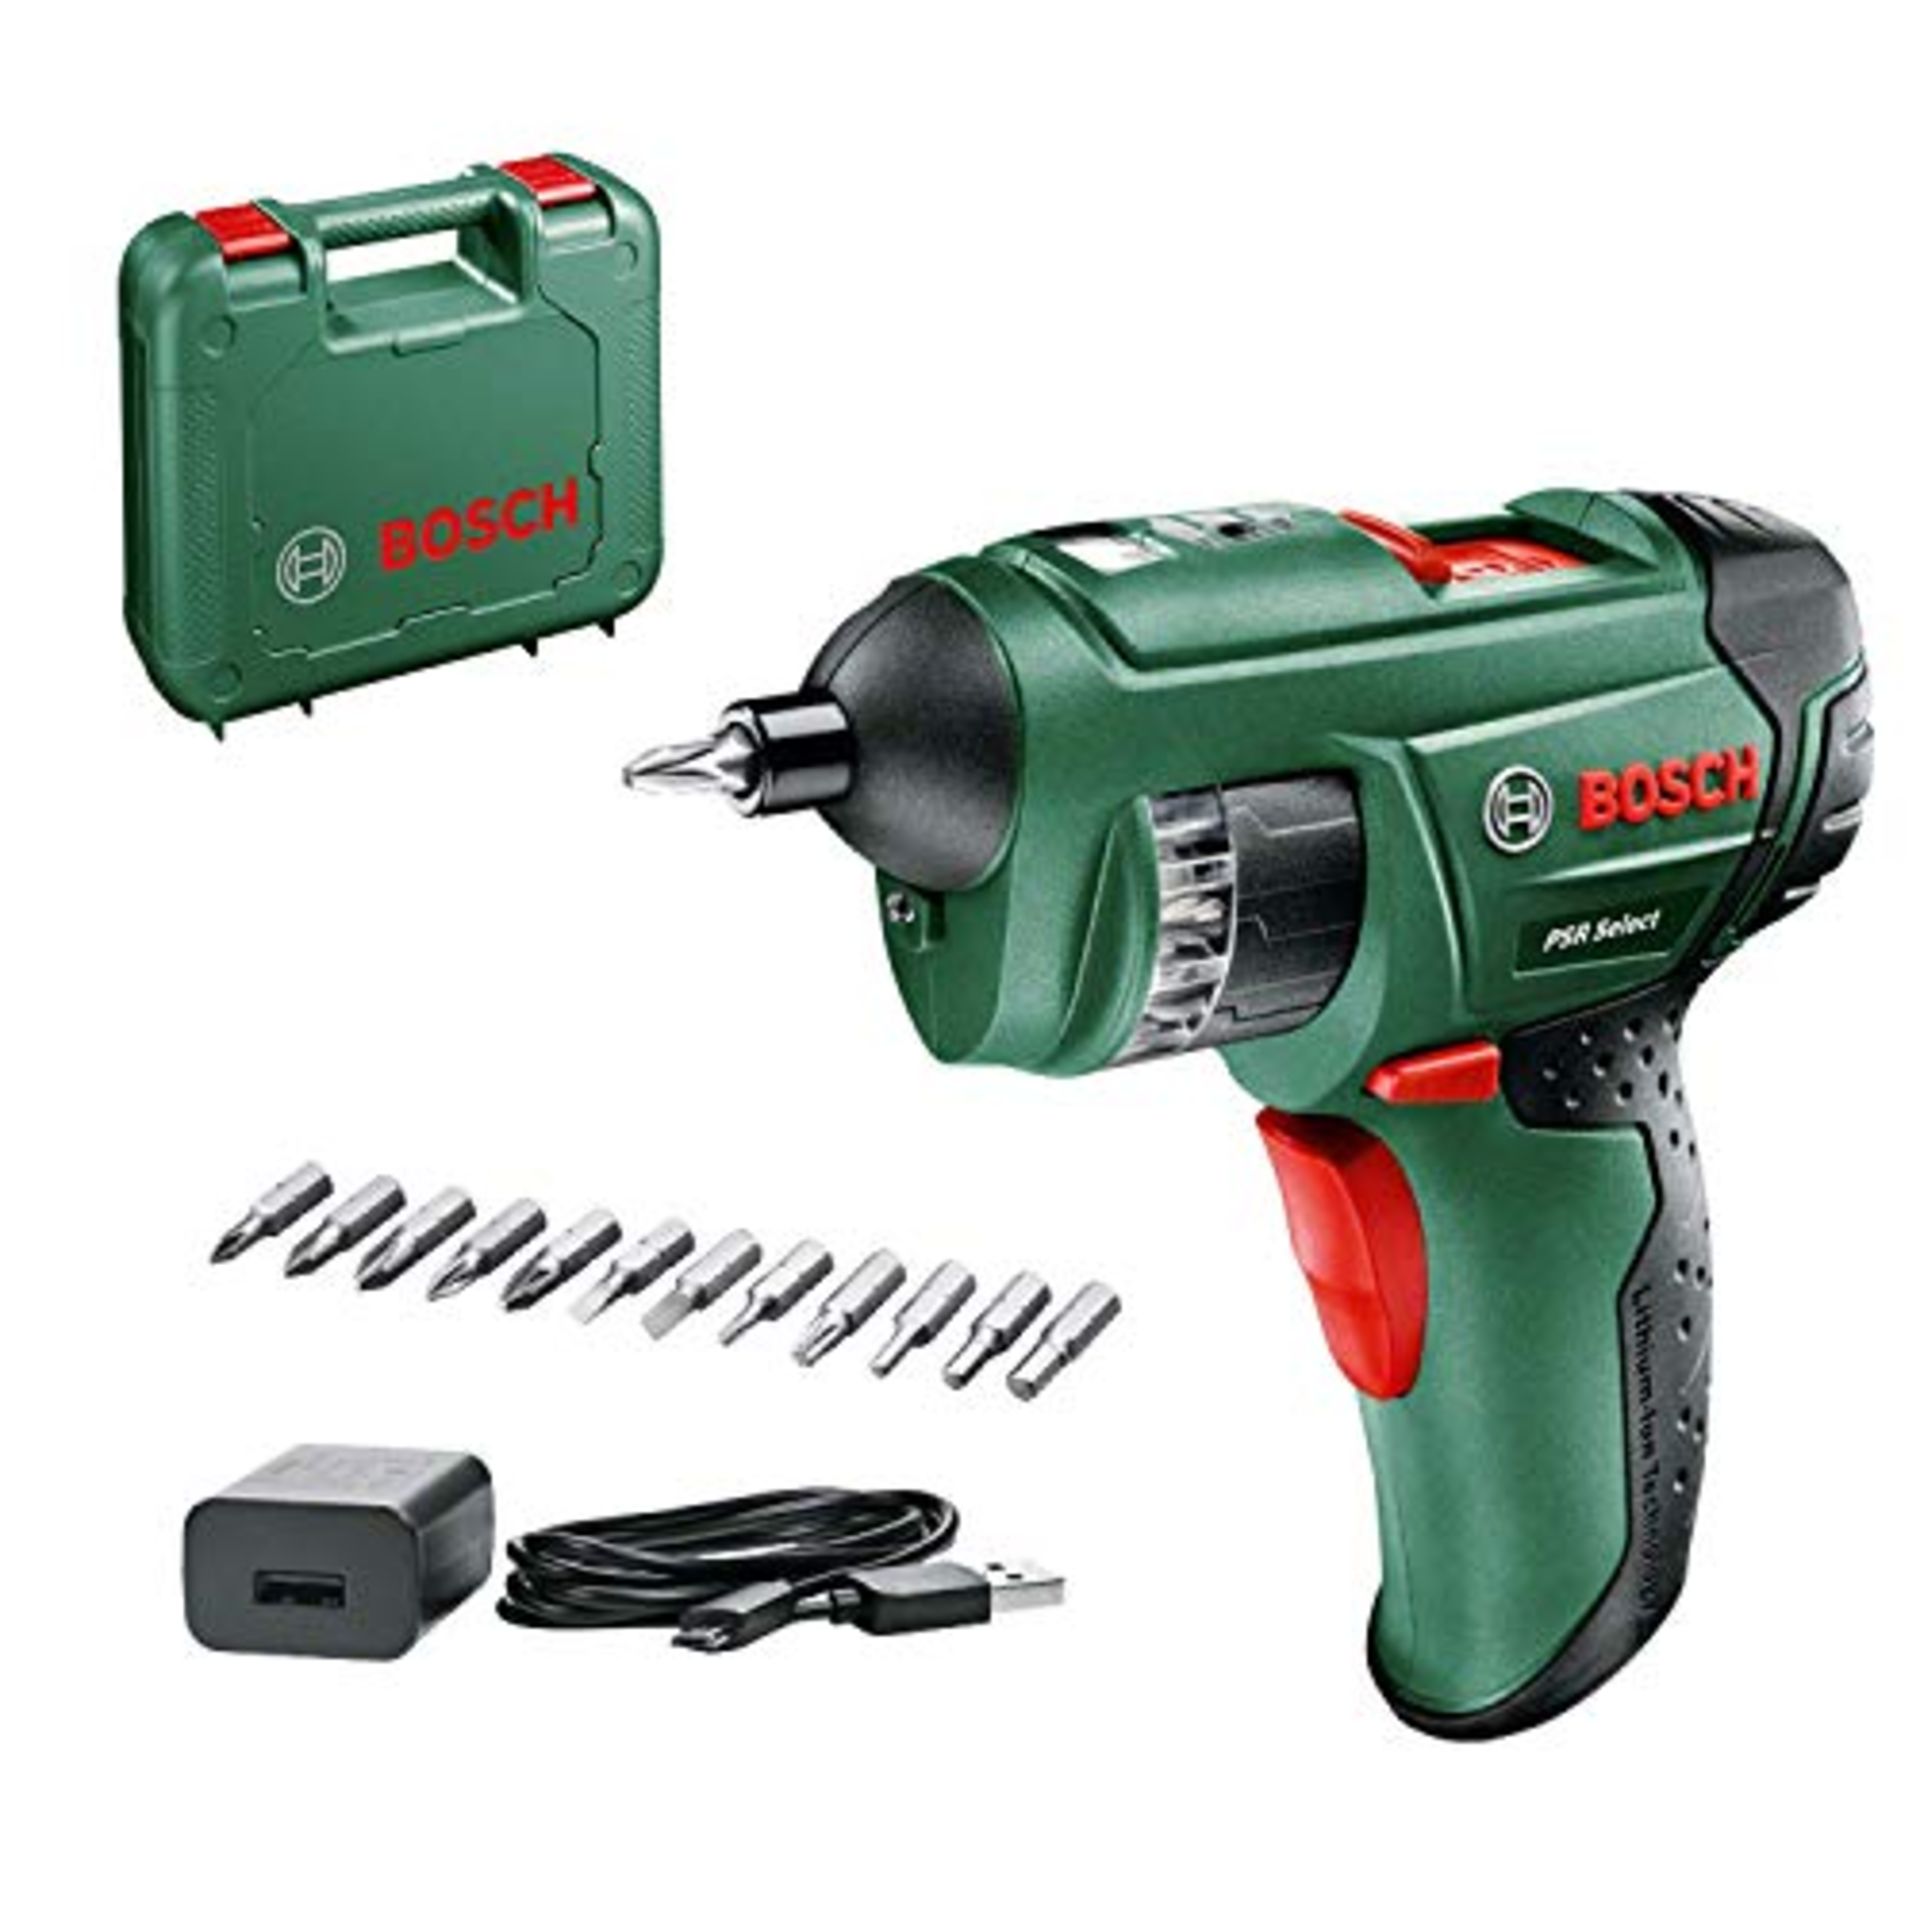 [INCOMPLETE] Bosch Home and Garden Cordless Screwdriver PSR Select (with Integrated 3.